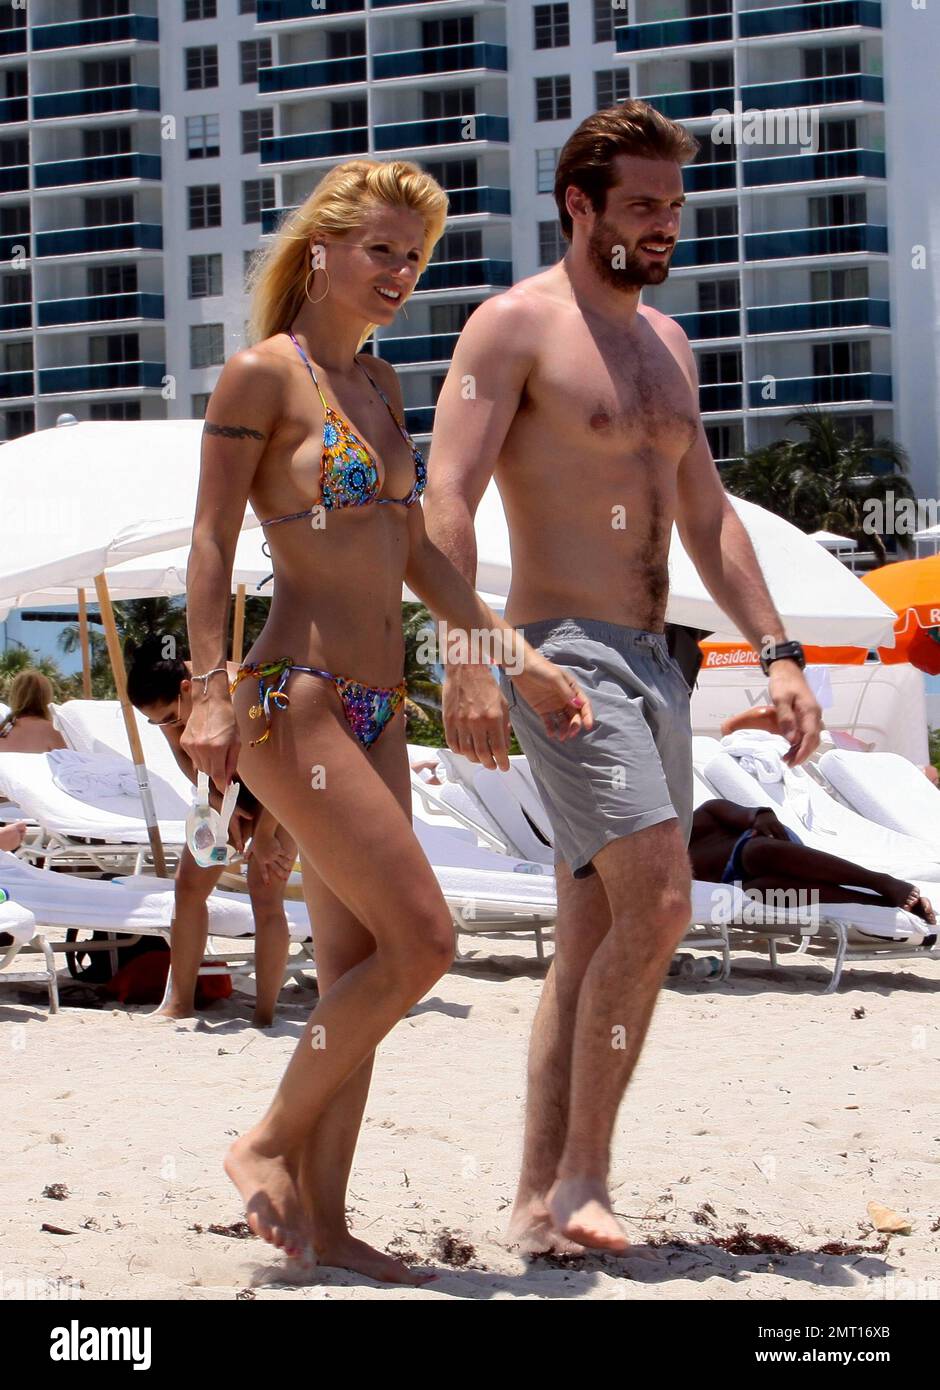 Swiss TV host and actress Michelle Hunziker spends the day in Miami Beach with boyfriend Tomaso Trussardi. 35 year old Hunziker wore a multi-color string bikini that showed off her amazing toned figure. The couple were seen taking a dip in the ocean, sharing a kiss and happily walking hand-in-hand. Miami Beach, FL. 3rd June 2012. . Stock Photo